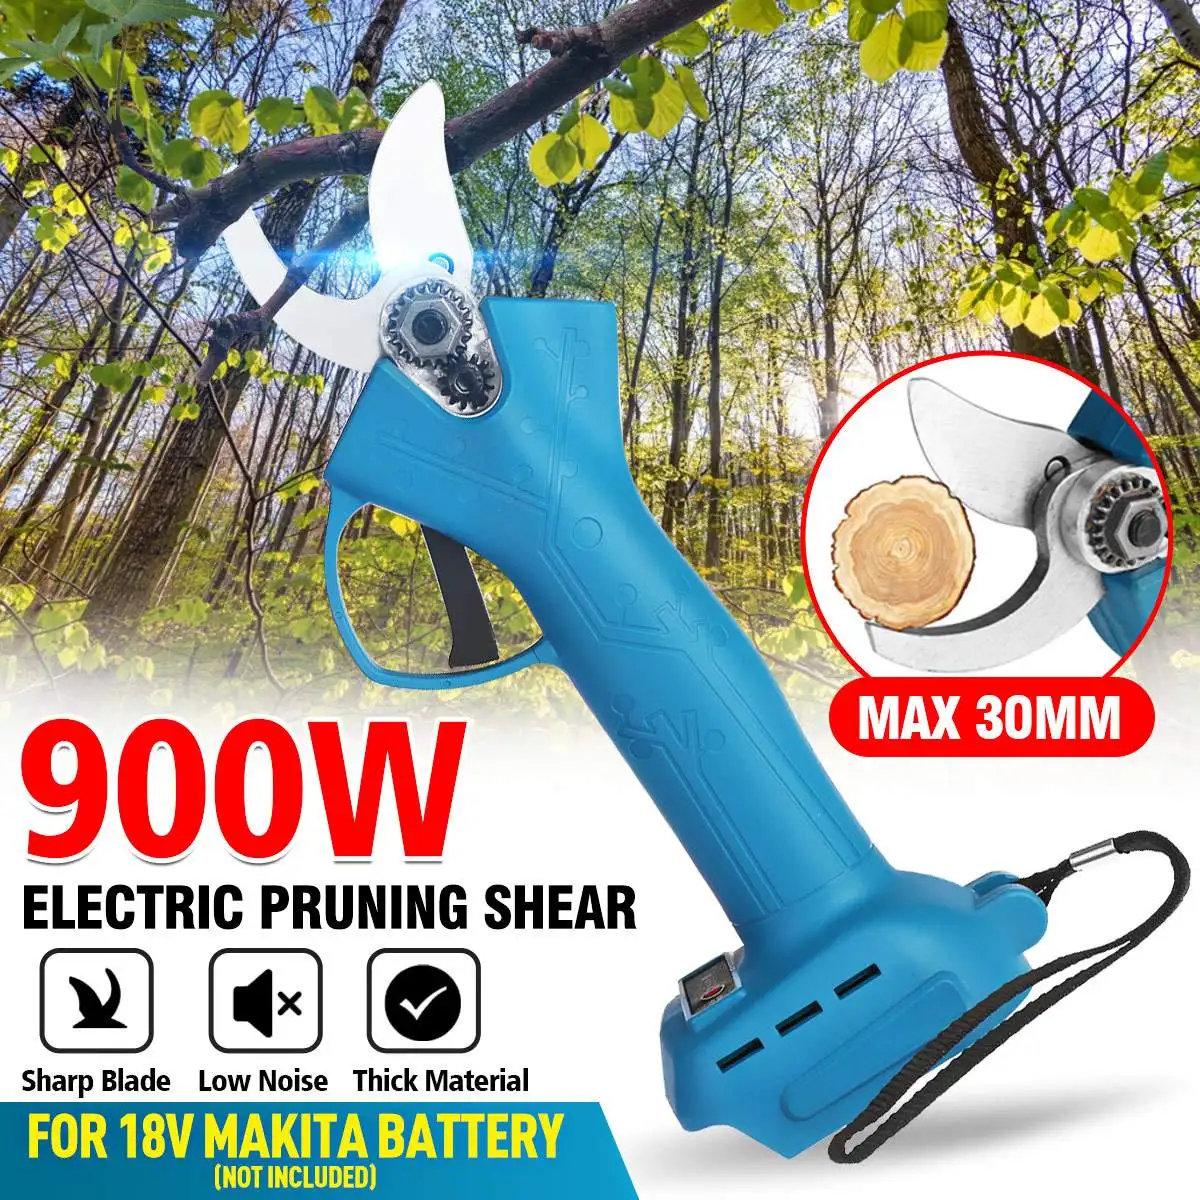 

30mm 900W Cordless Electric Pruner Pruning Shear Efficient Fruit Tree Bonsai Branches Cutter Landscaping for Makita 18V Battery